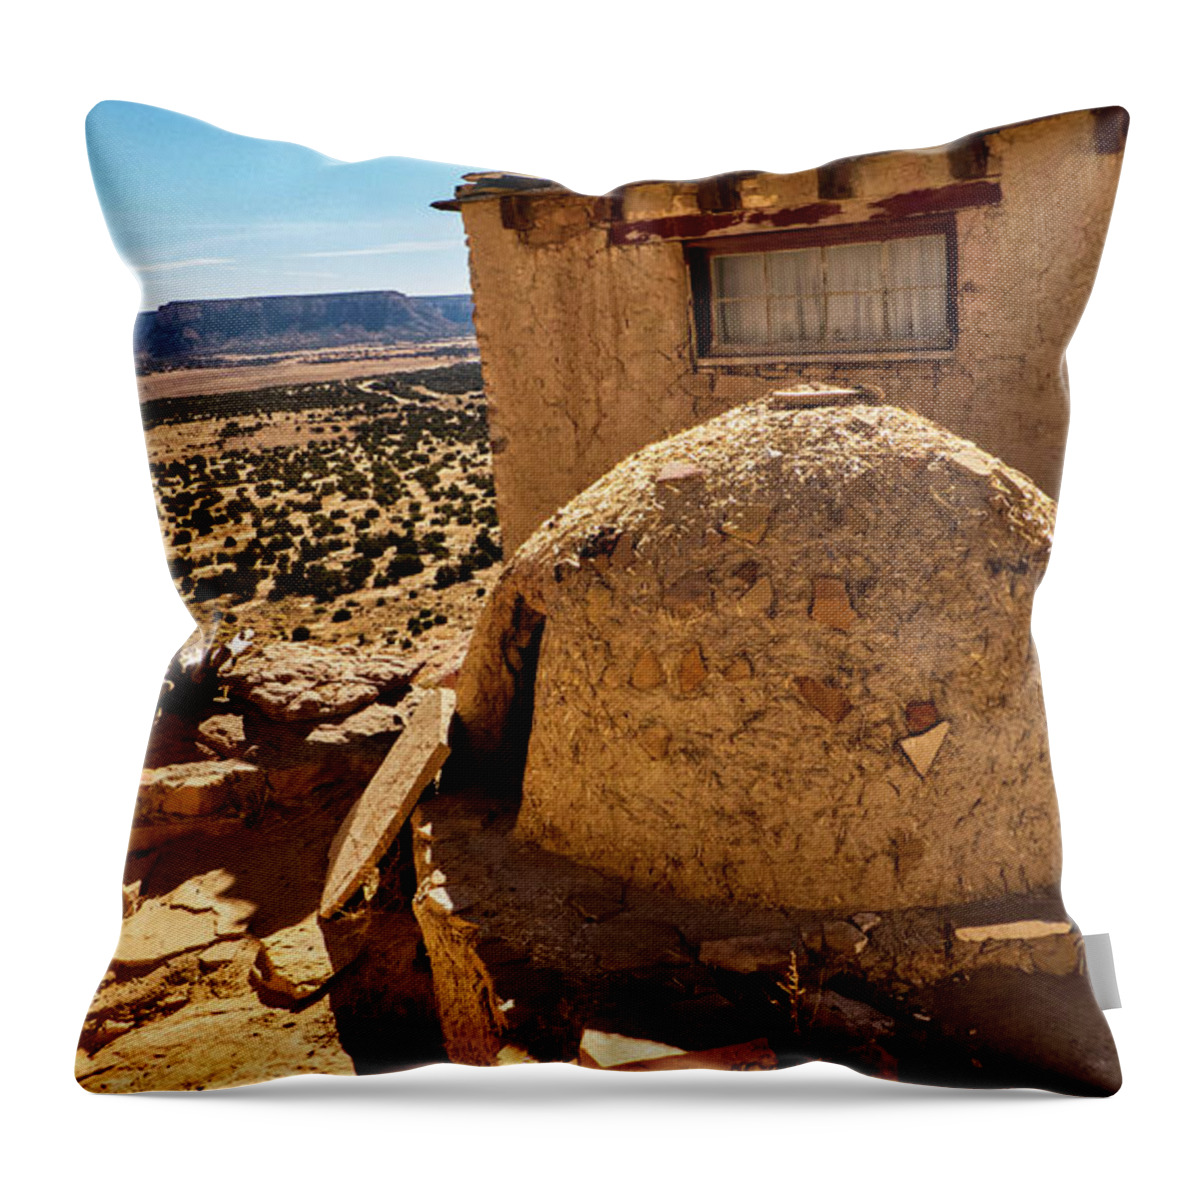 Acoma Throw Pillow featuring the photograph Acoma by Segura Shaw Photography